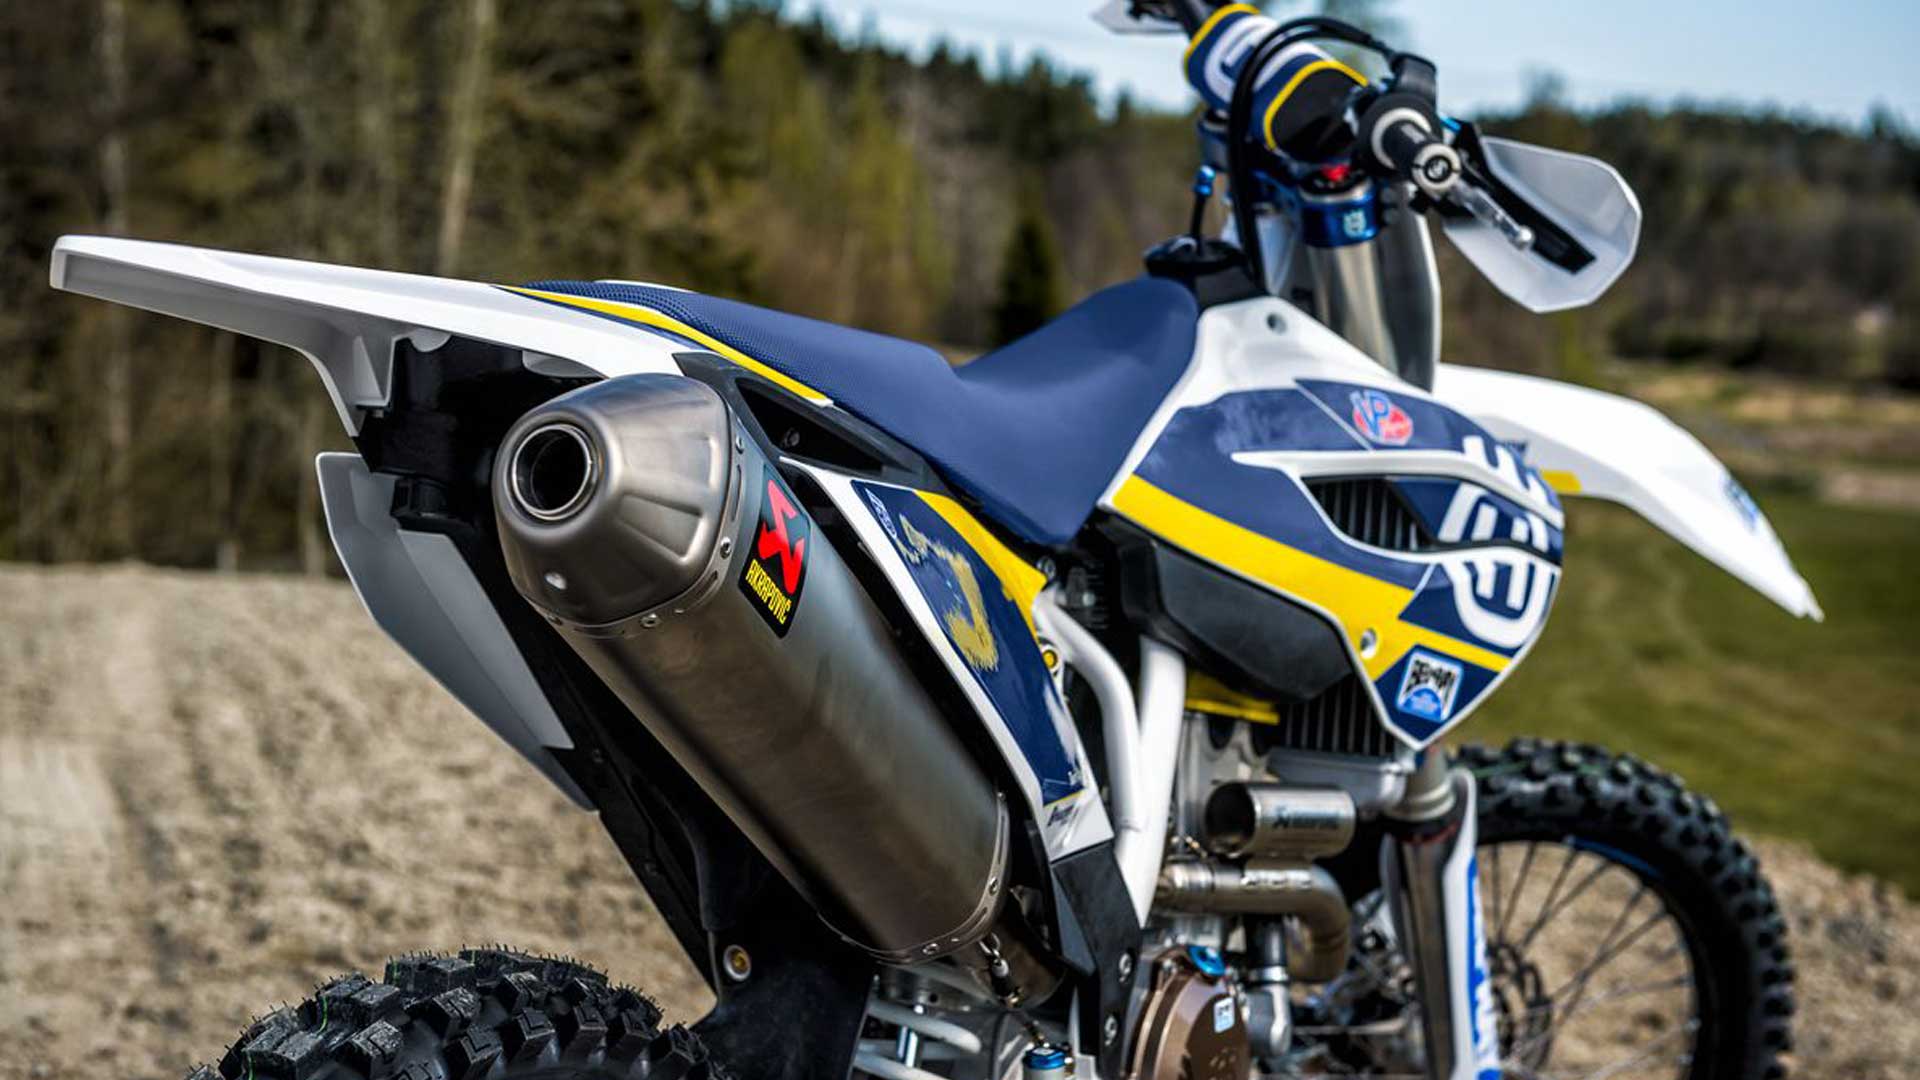 Free download Husqvarna Motorcycles at Midwest RacingWiltshire UK [1920x1080] for your Desktop, Mobile & Tablet. Explore Husqvarna Supermoto Wallpaper. Husqvarna Supermoto Wallpaper